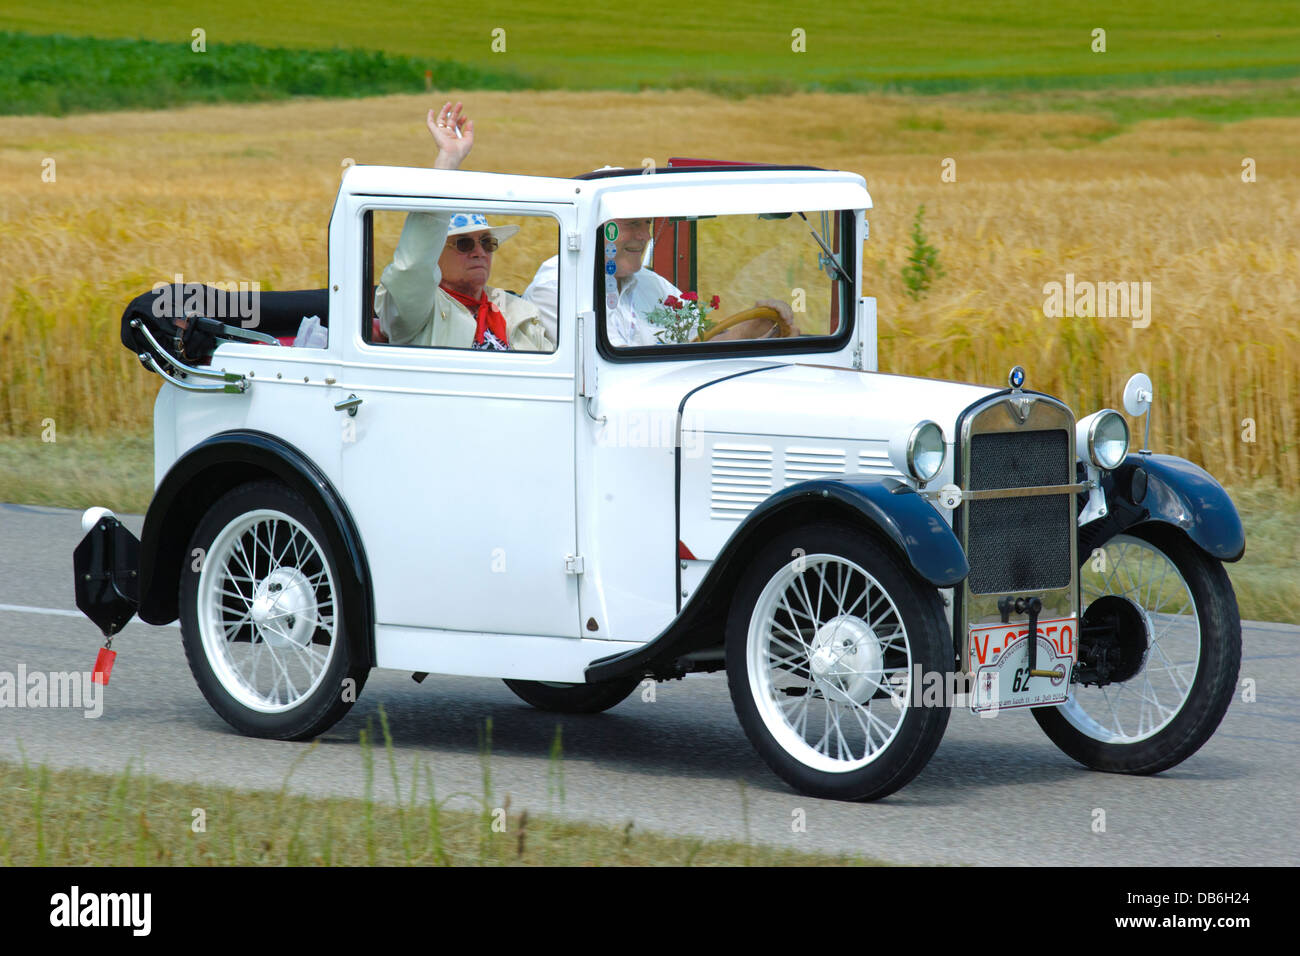 BMW Dixi Cabriolet, built at year 1929, photo taken on July 13, 2013 in Landsberg, Germany Stock Photo